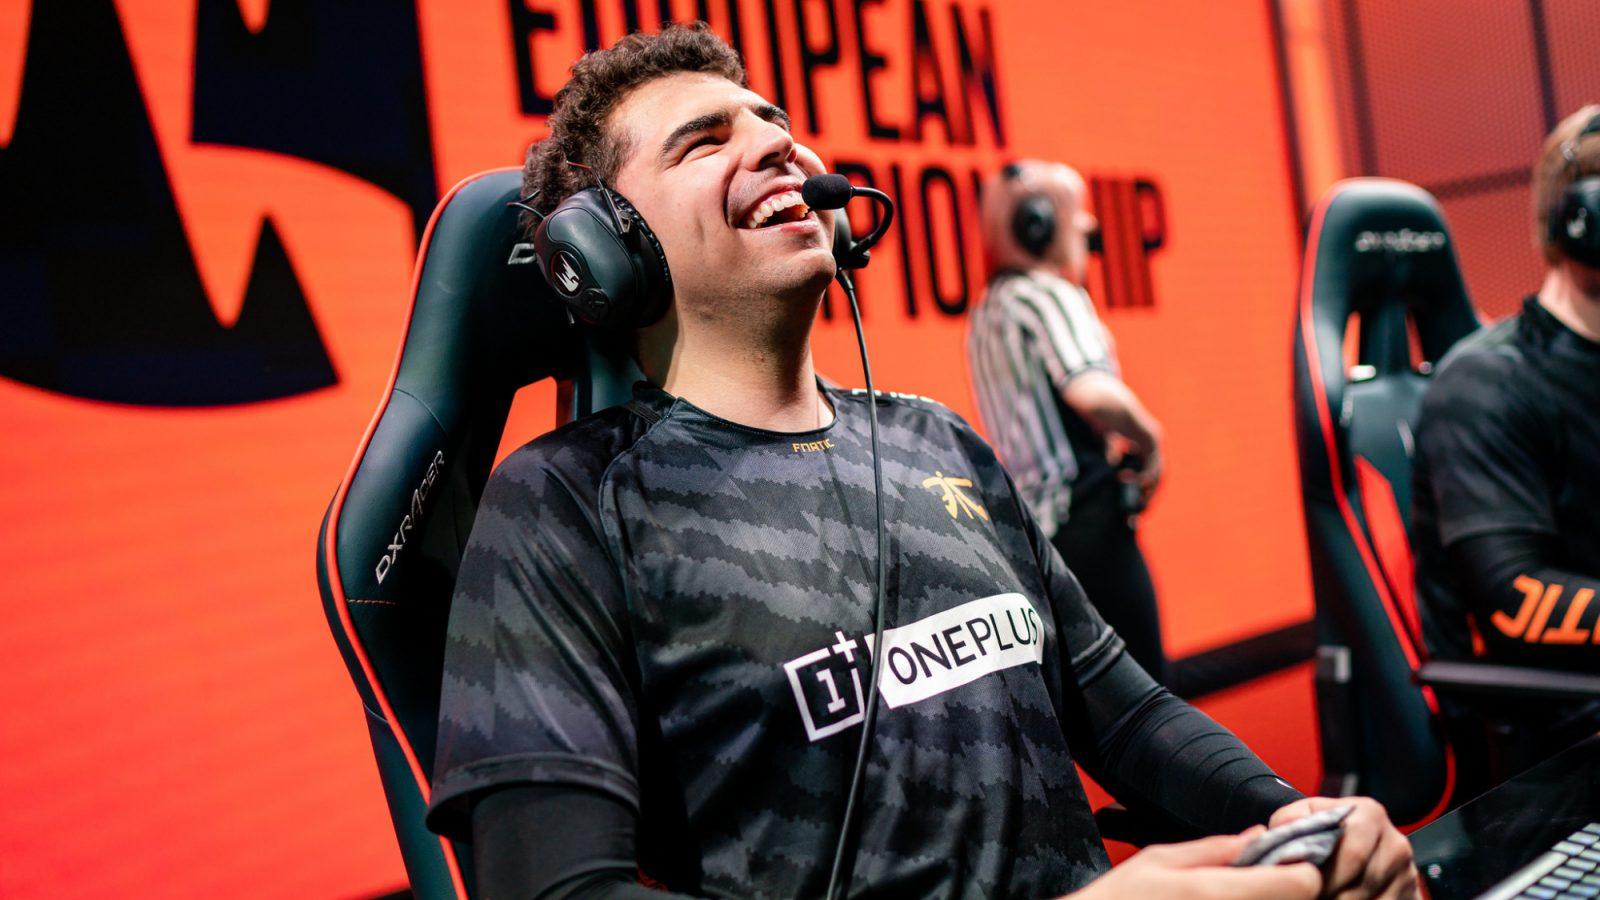 Bwipo has played more than 100 games for Fnatic since early 2018.